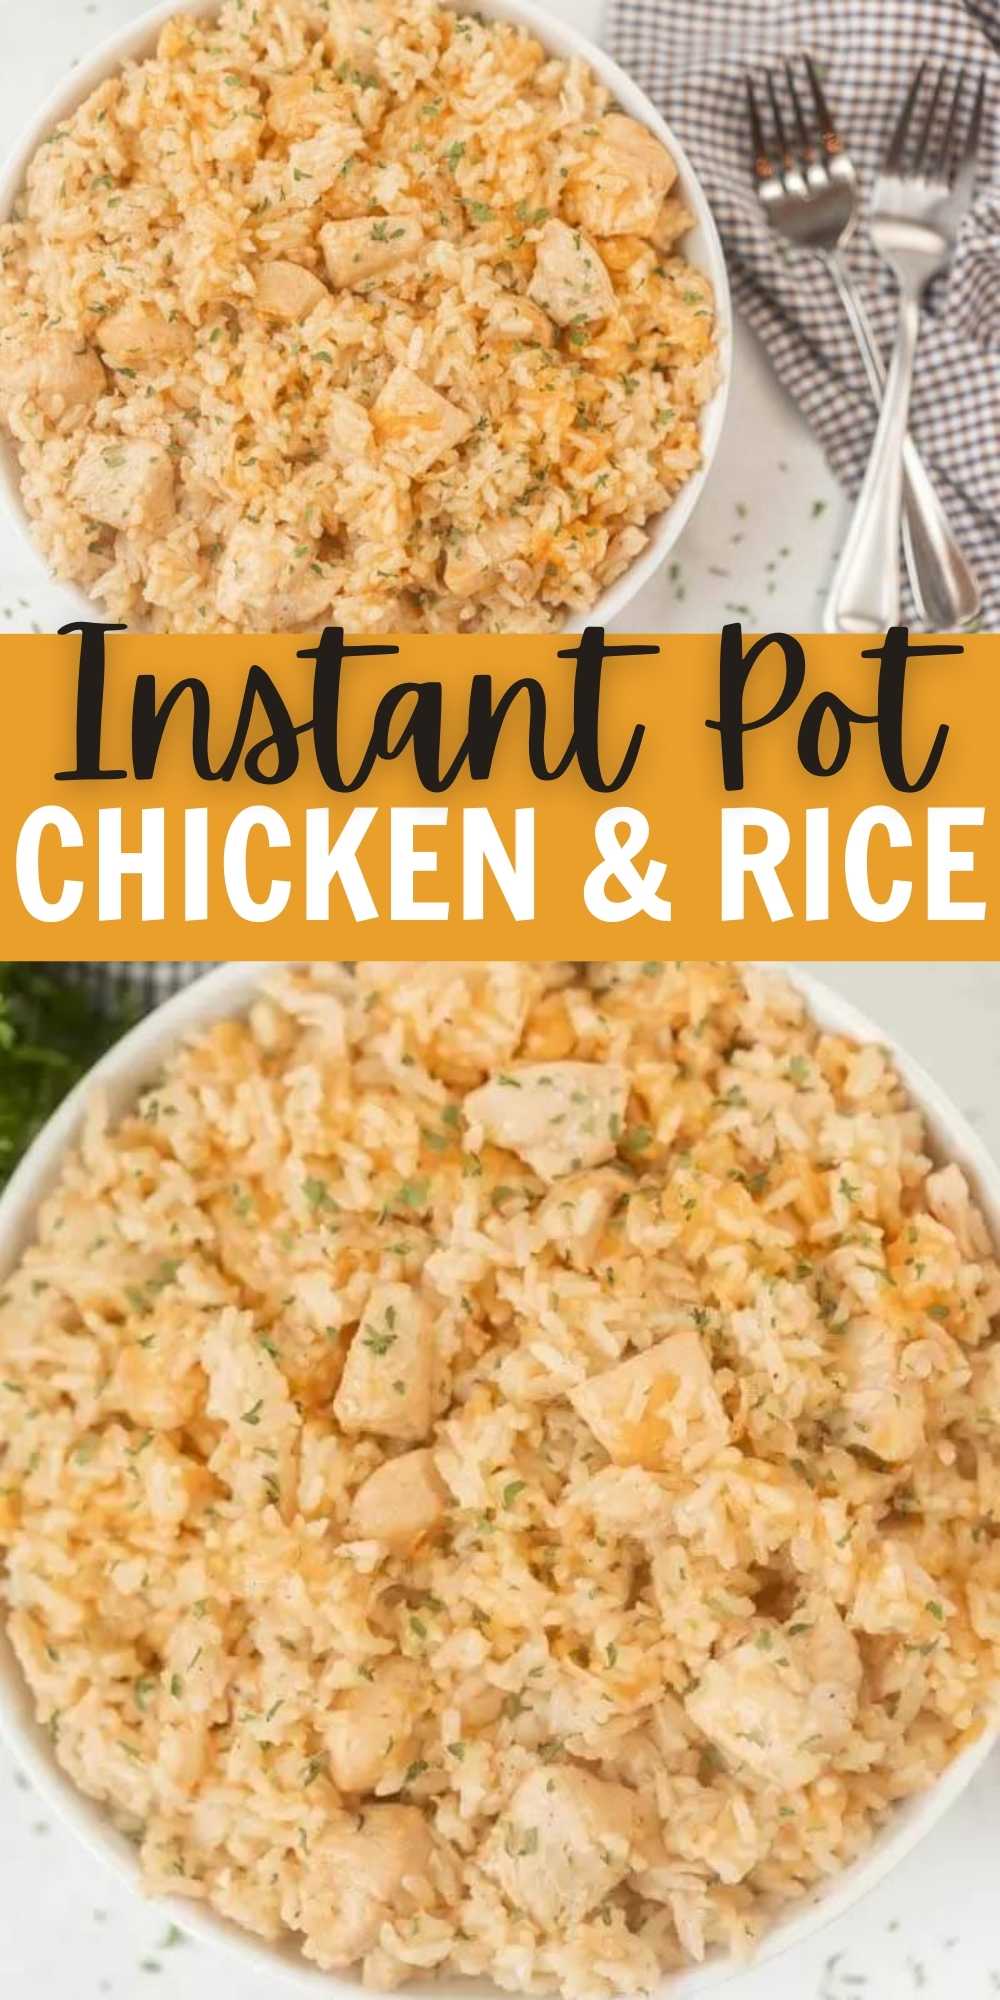 Get dinner on the table fast with Chicken and Rice Instant Pot Recipe. Ready in only 30 minutes, Instant pot cheesy chicken and rice casserole is so simple and delicious too! The entire family will love this easy to make Instant Pot Chicken and Rice Recipe! #eatingonadime #instantpotrecipes #chickenrecipes #chickenandrice 
